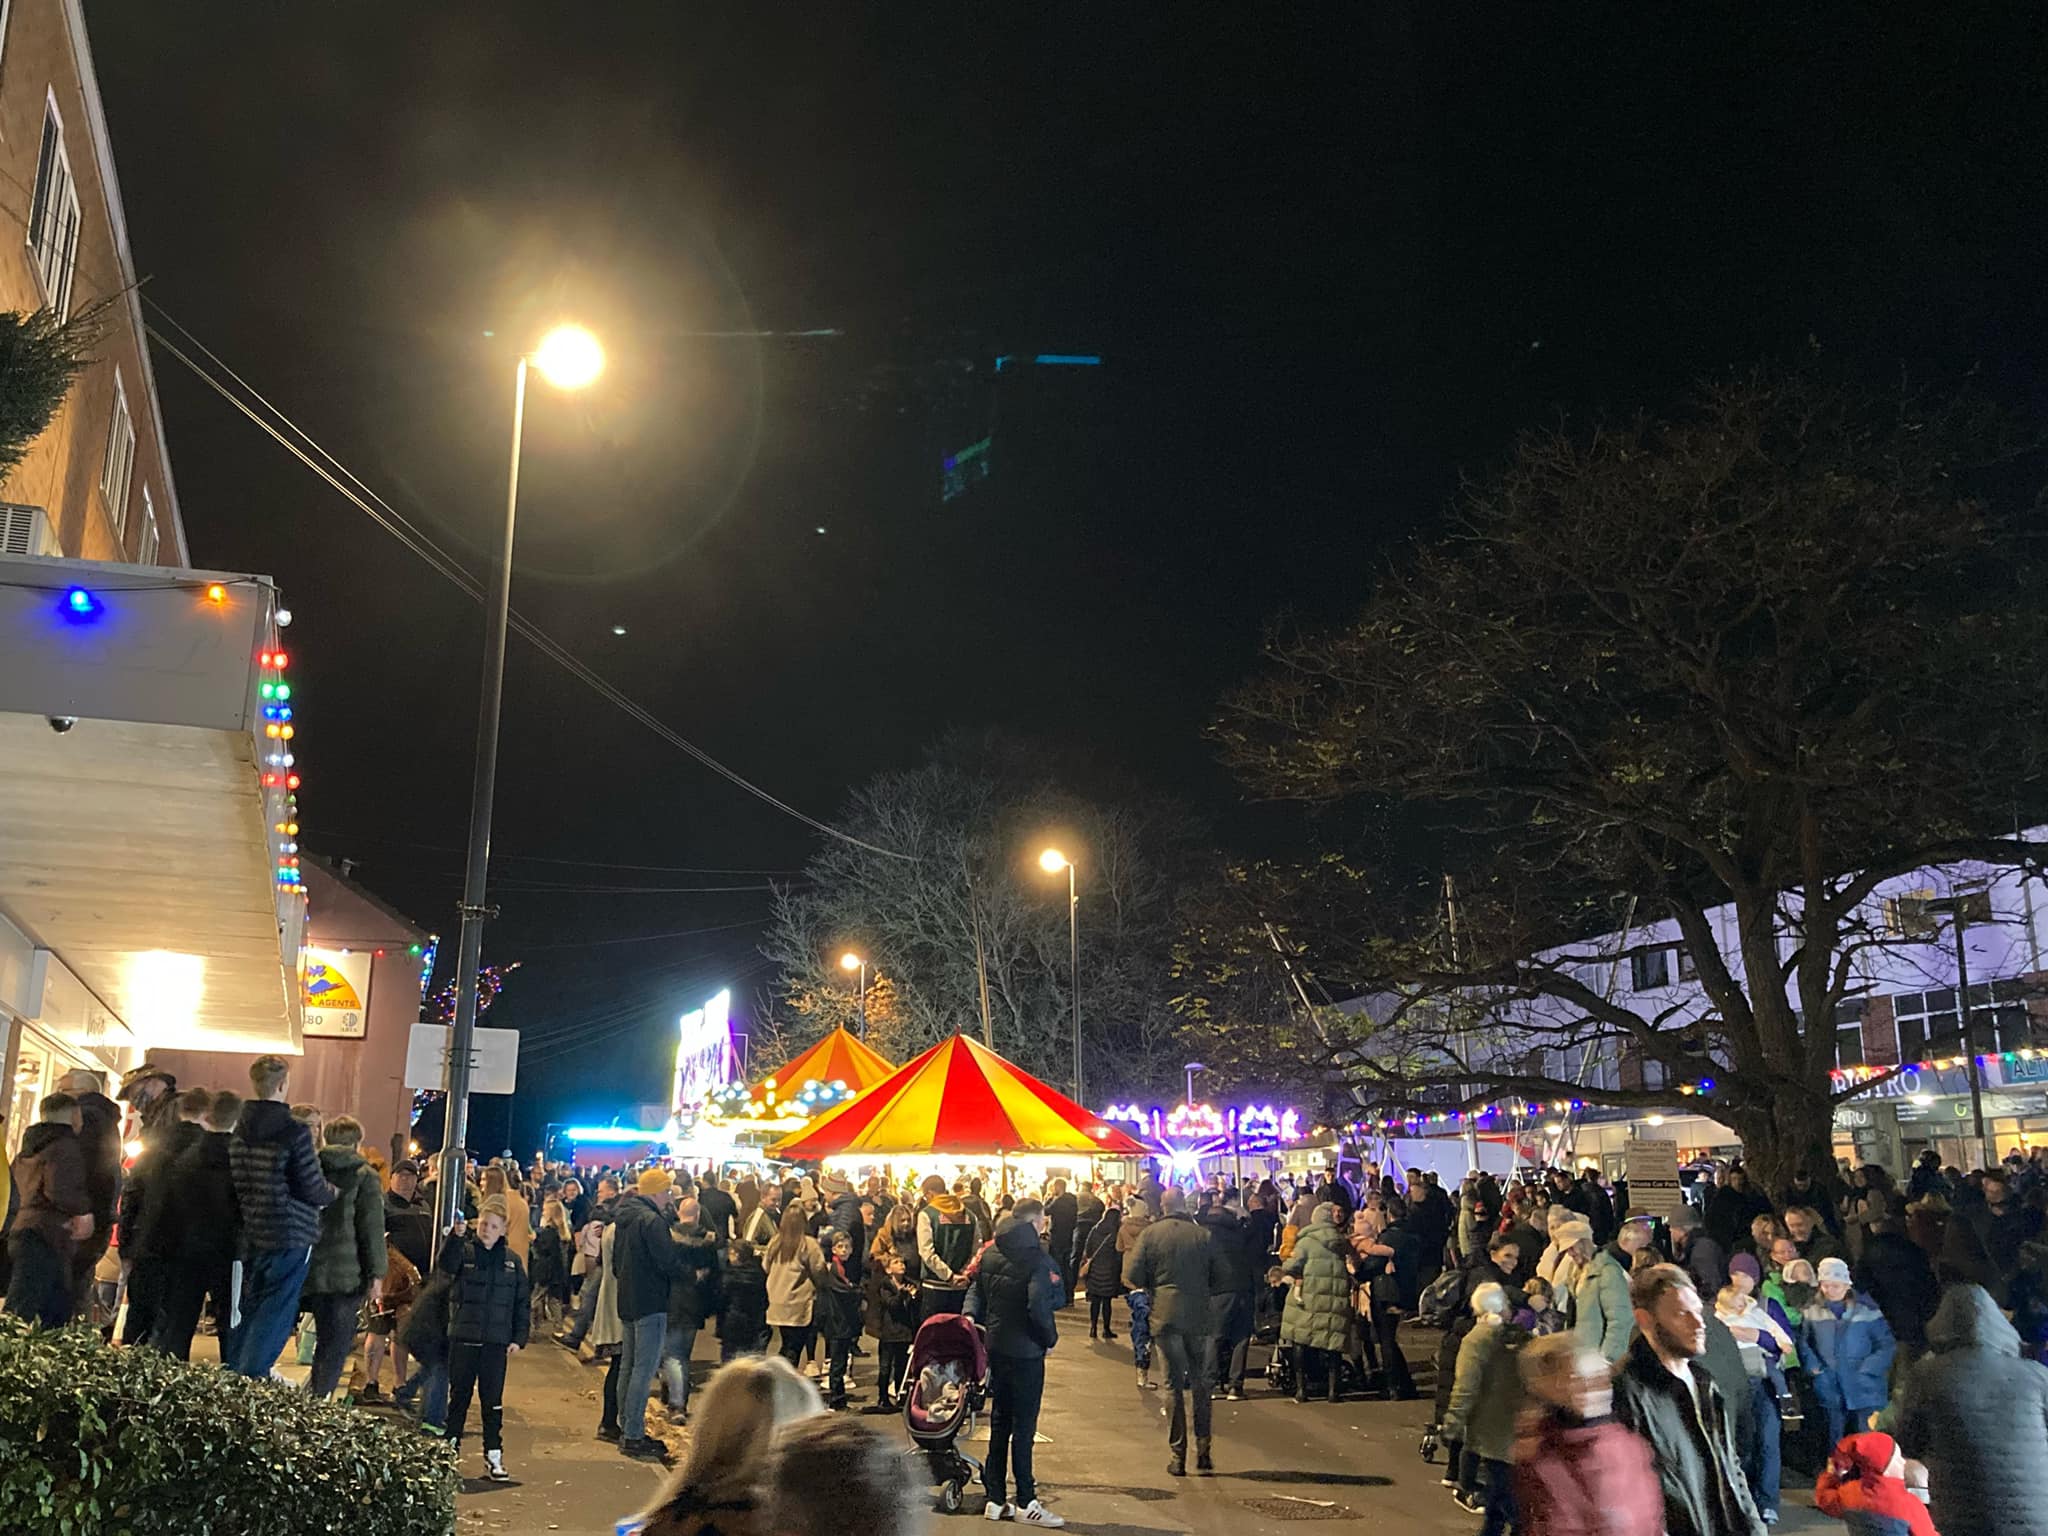 Crowds of people on Chapel Street during Spondon Alight 2021